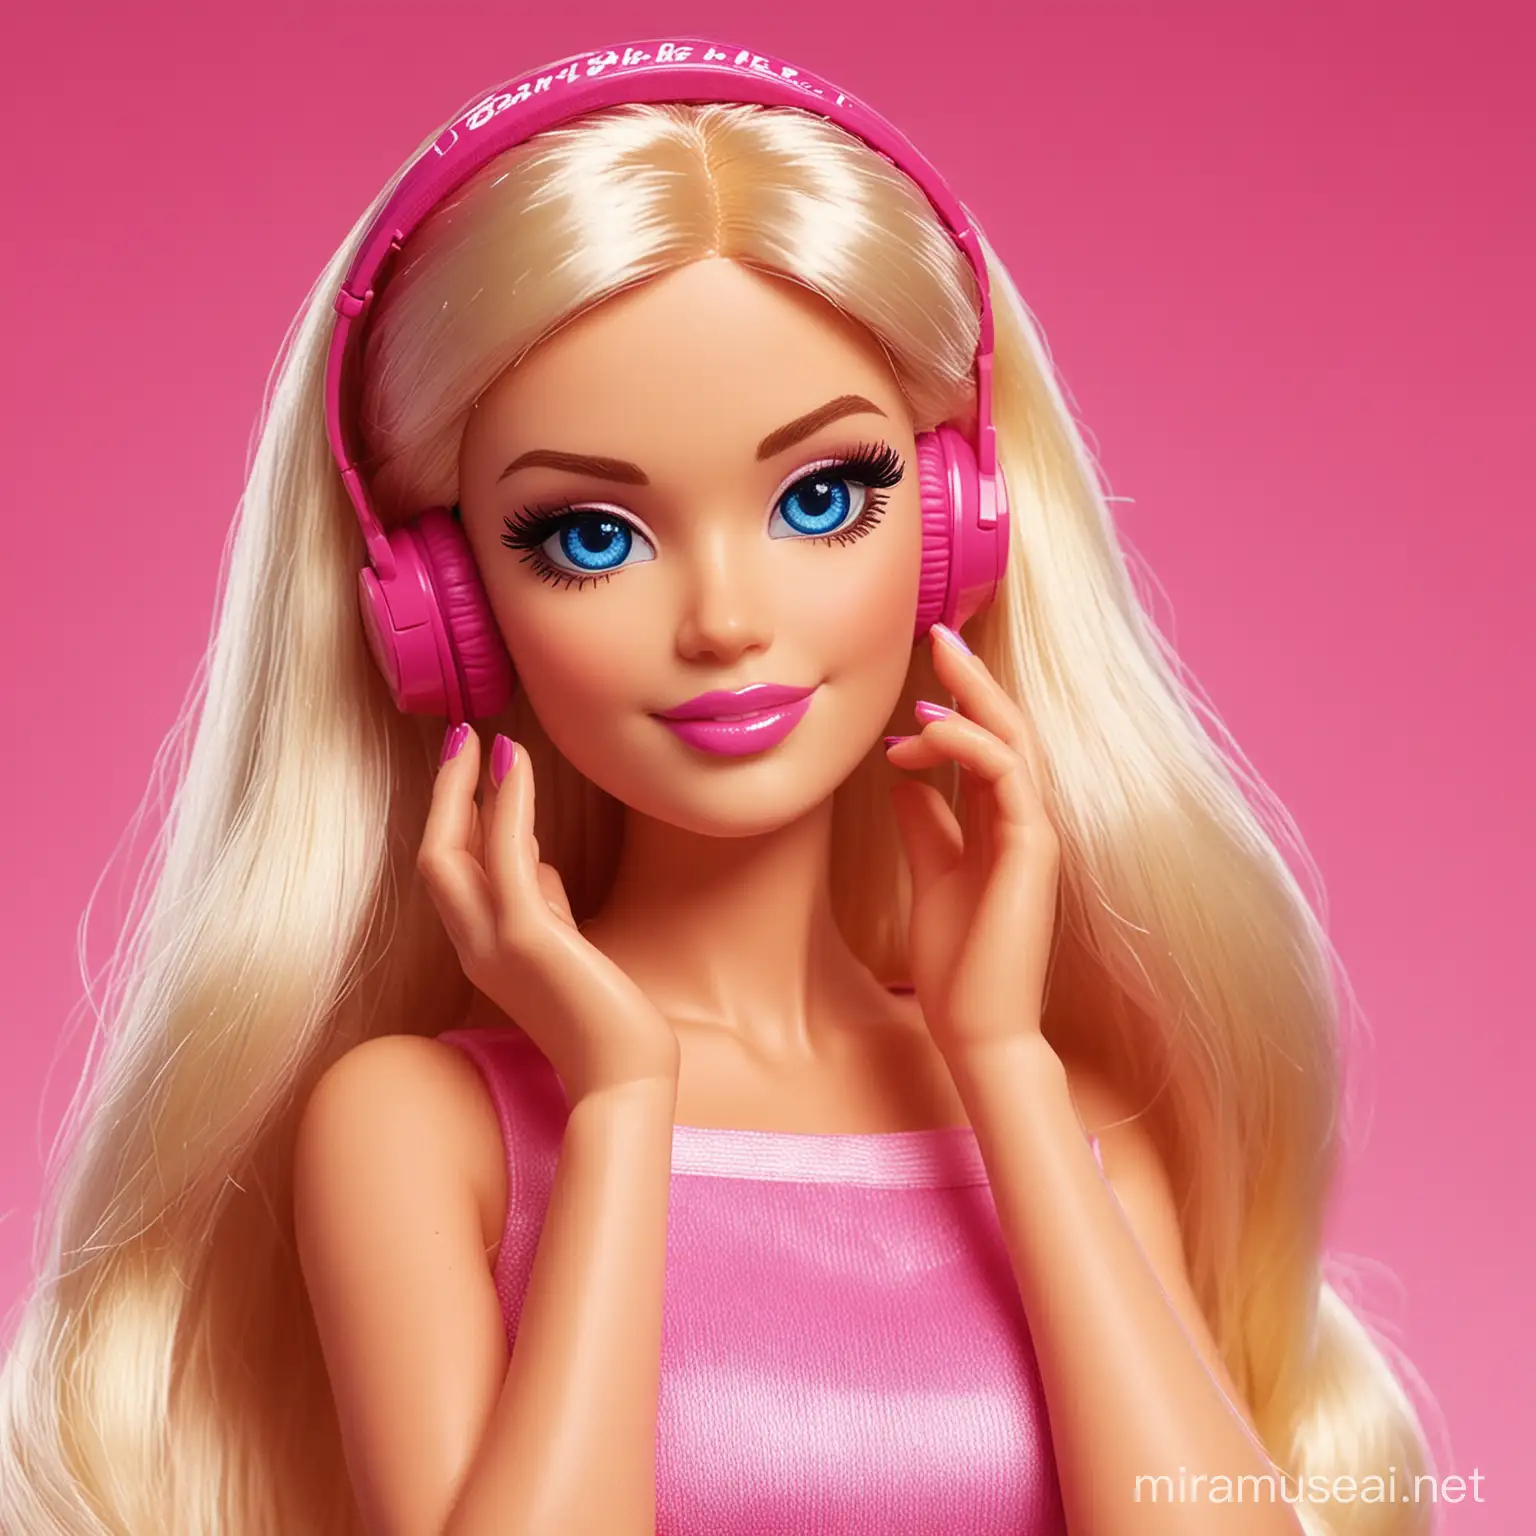 barbie on a podcast winkinh

